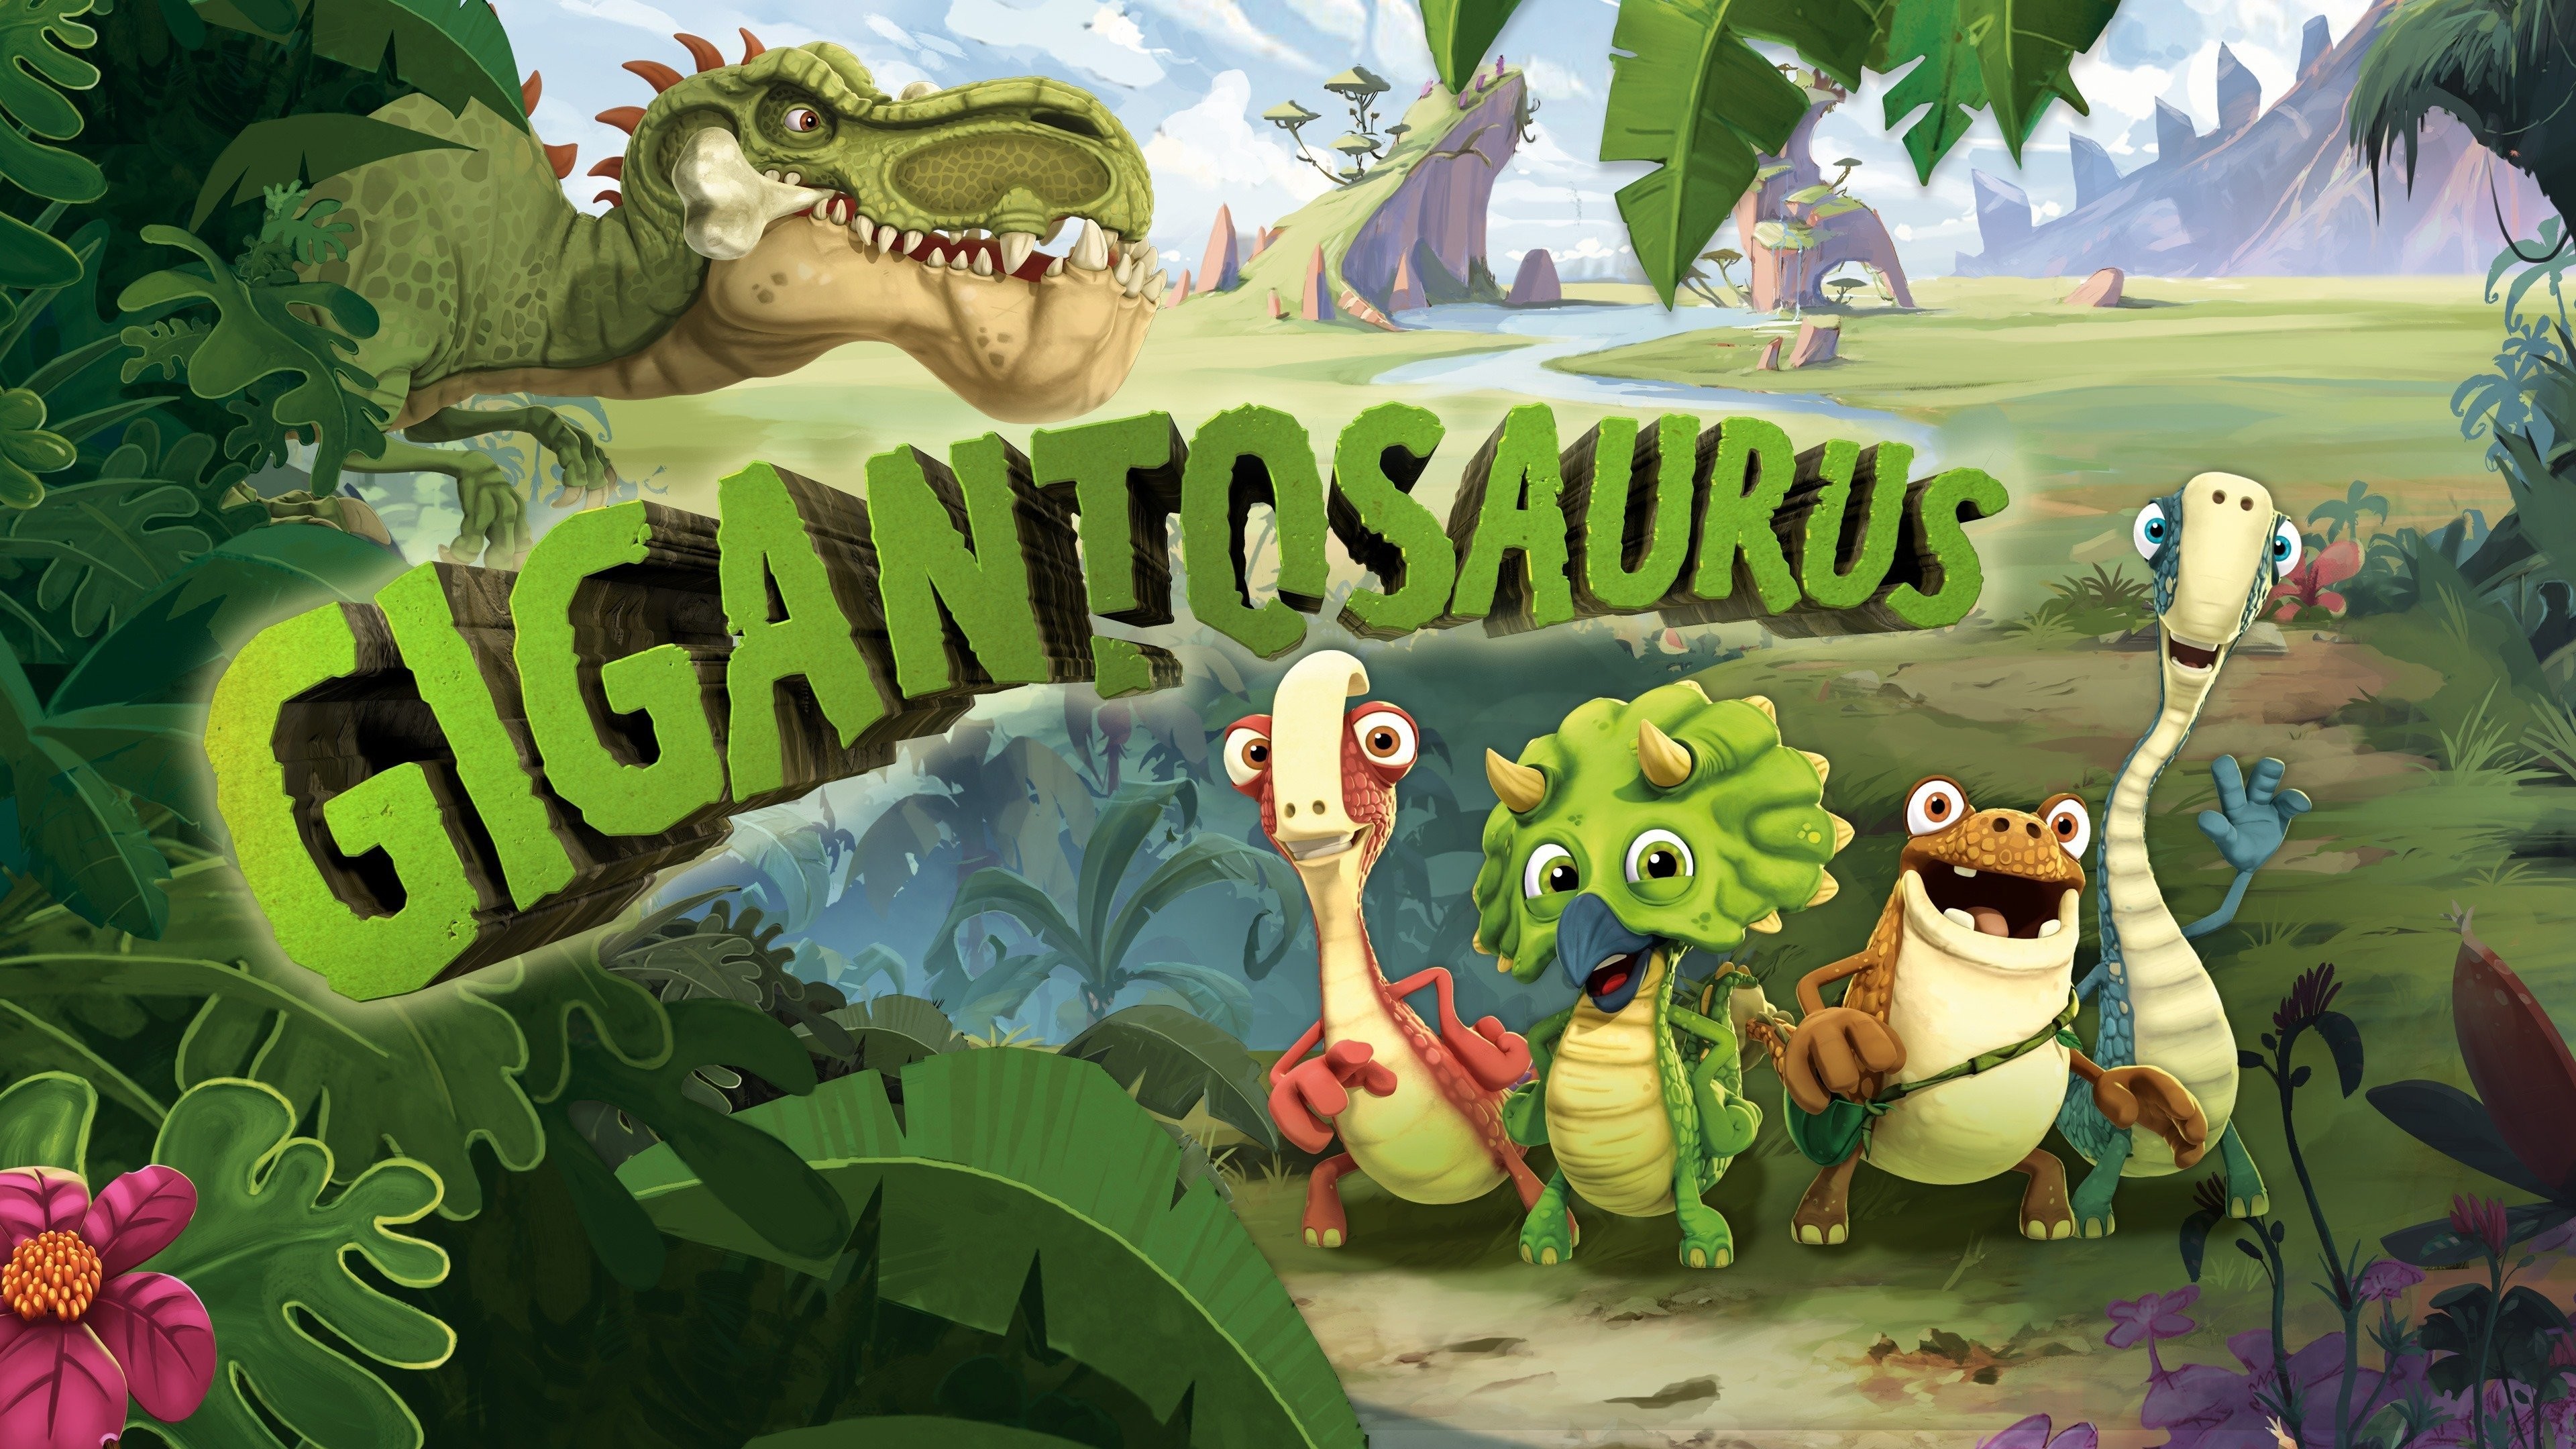 Gigantosaurus' S3 Brings New Characters, Locations & Songs to